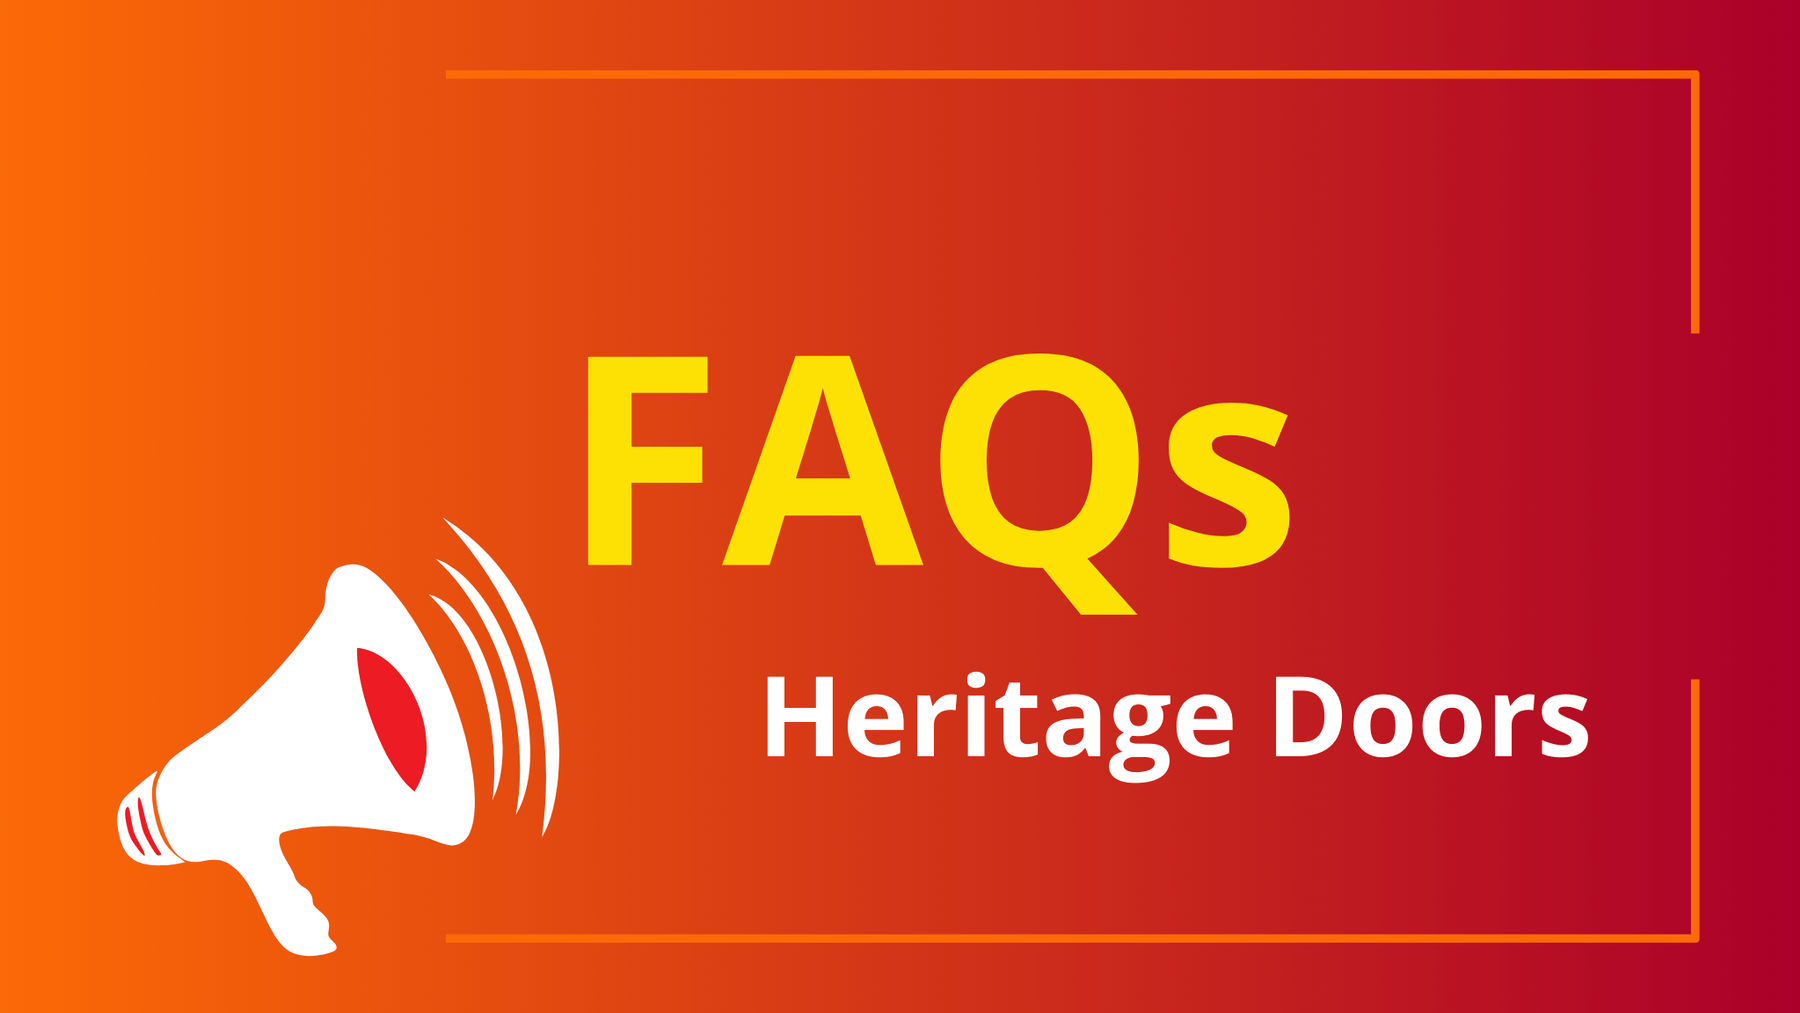 Frequently Asked Questions (FAQs) for Aluminium Heritage Doors